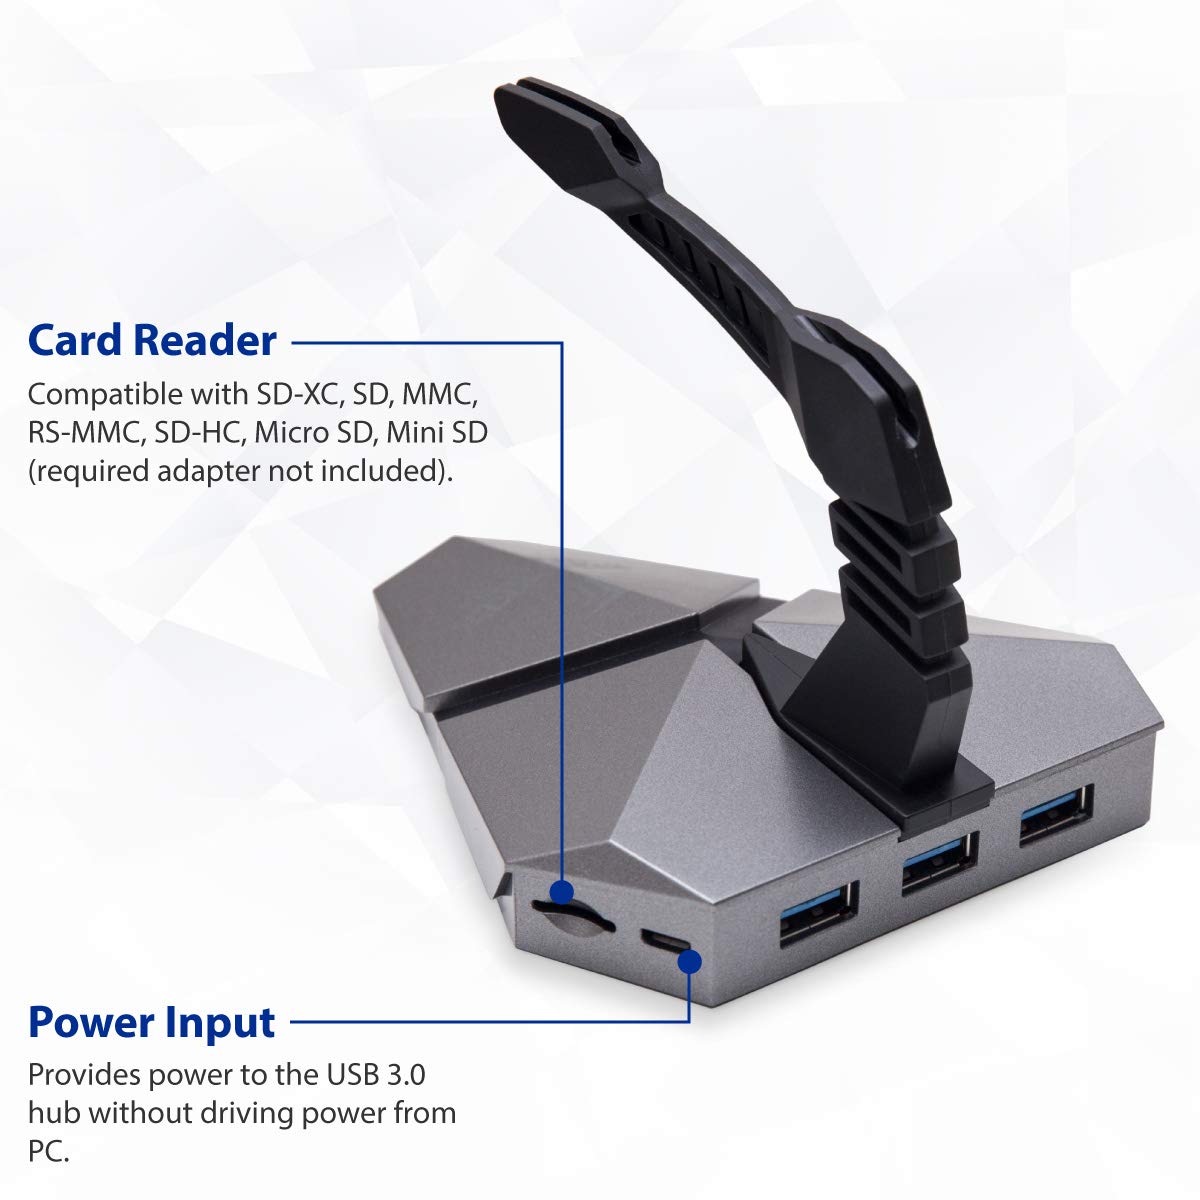 LOKI Gaming Mouse Bungee Stand - RGB LED Lights - 4 Port USB 3.0 Hub with Active Power - Micro SD Card Reader Slot - PC; Mac; Linux